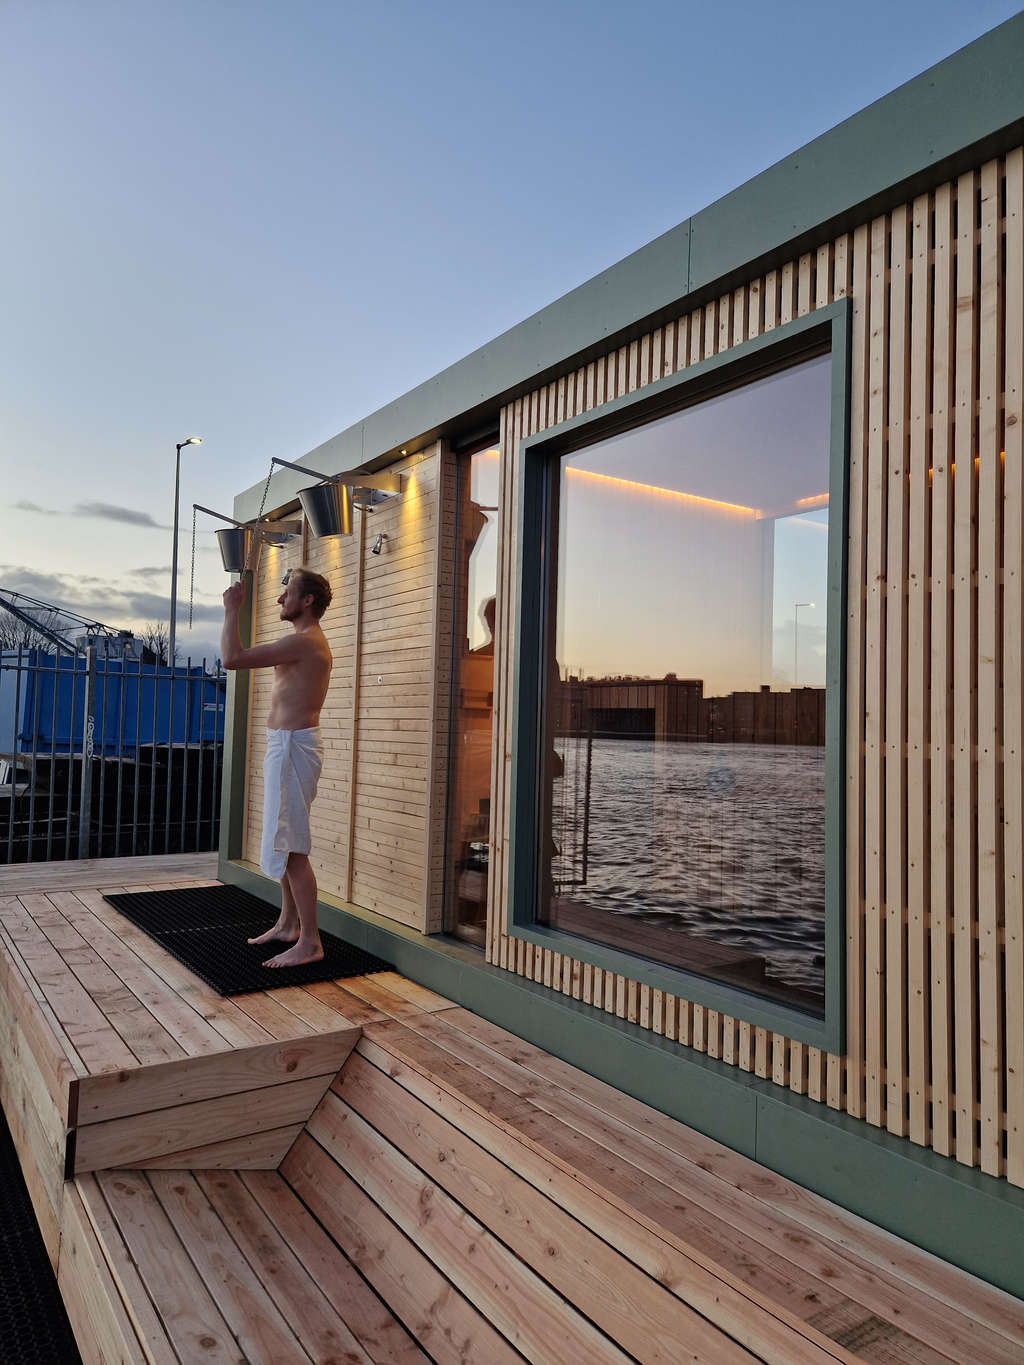 Kuuma’s pop-up saunas, which were located in Amsterdam this past winter, have been moved to Kraggenburg and 
Rotterdam, the Netherlands. The concept not only makes wellness space more accessible but reveals how certain spaces 
can be differently utilized throughout the year.— Source: Creative Supply